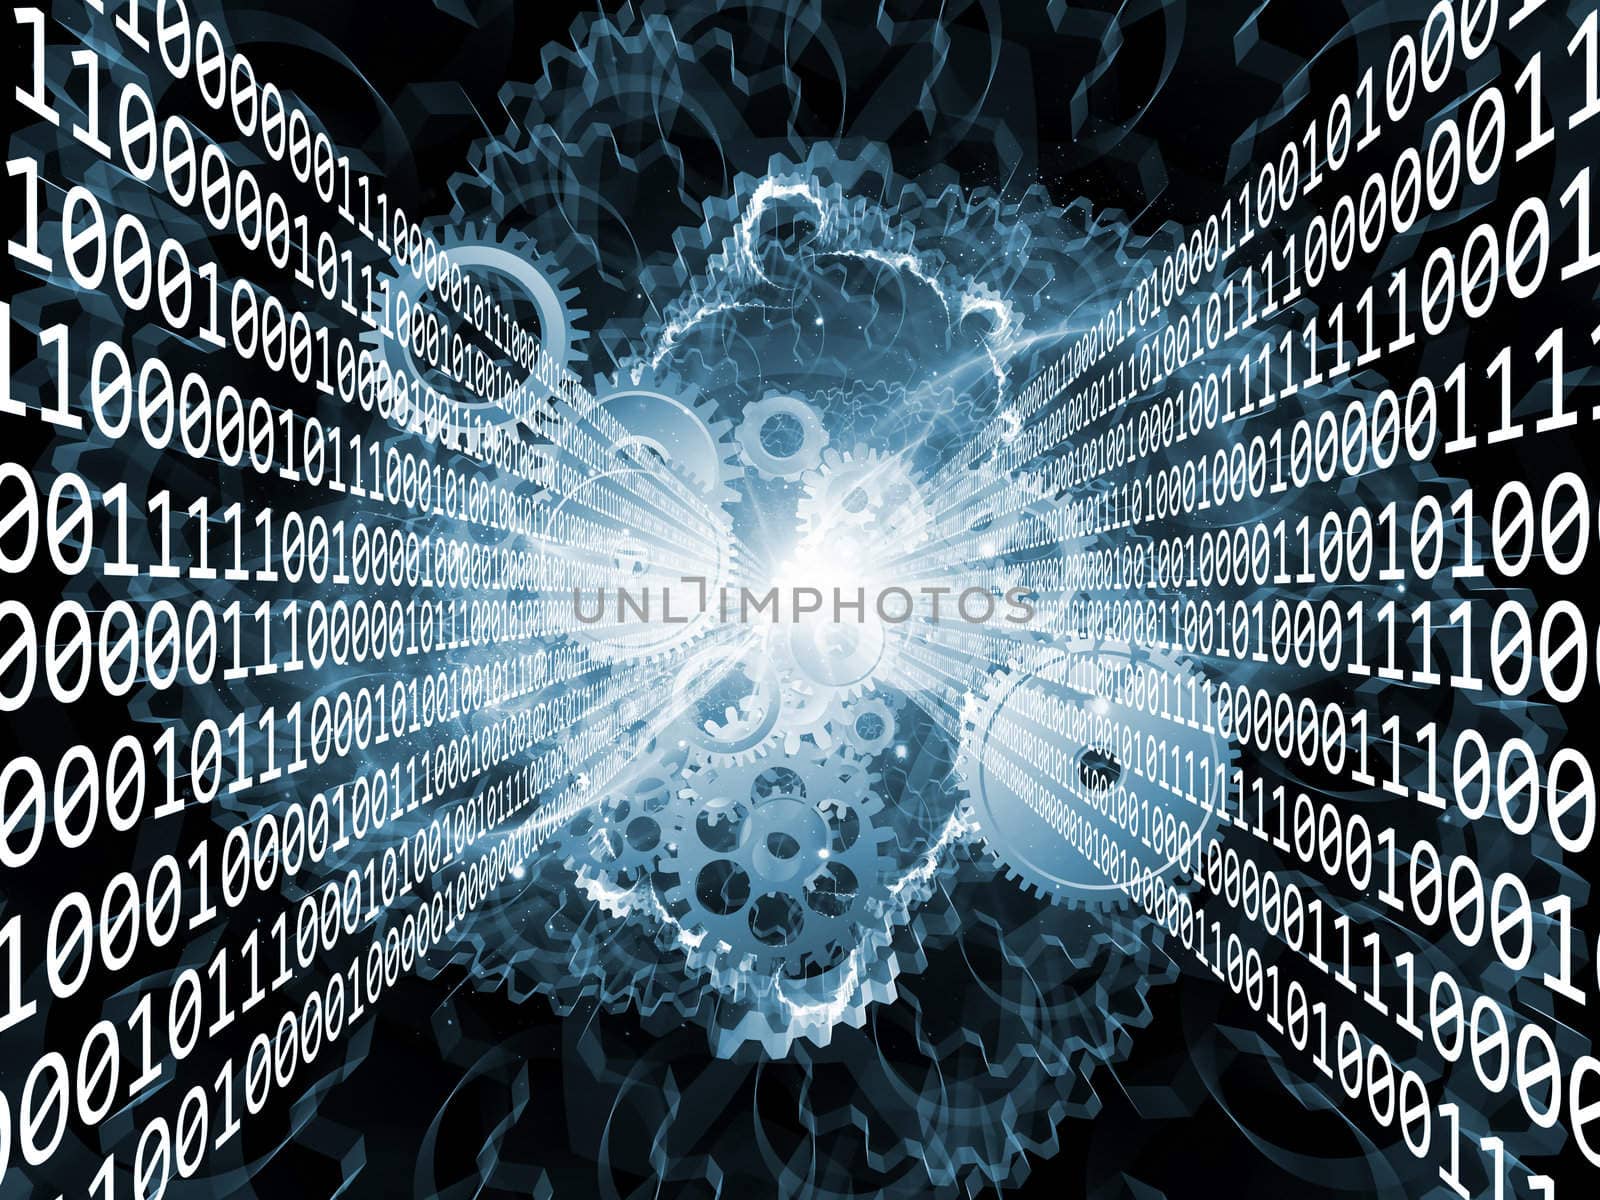 Composition of numbers, lights, gears and abstract design elements as a concept metaphor for digital and computational processes, math and modern technologies